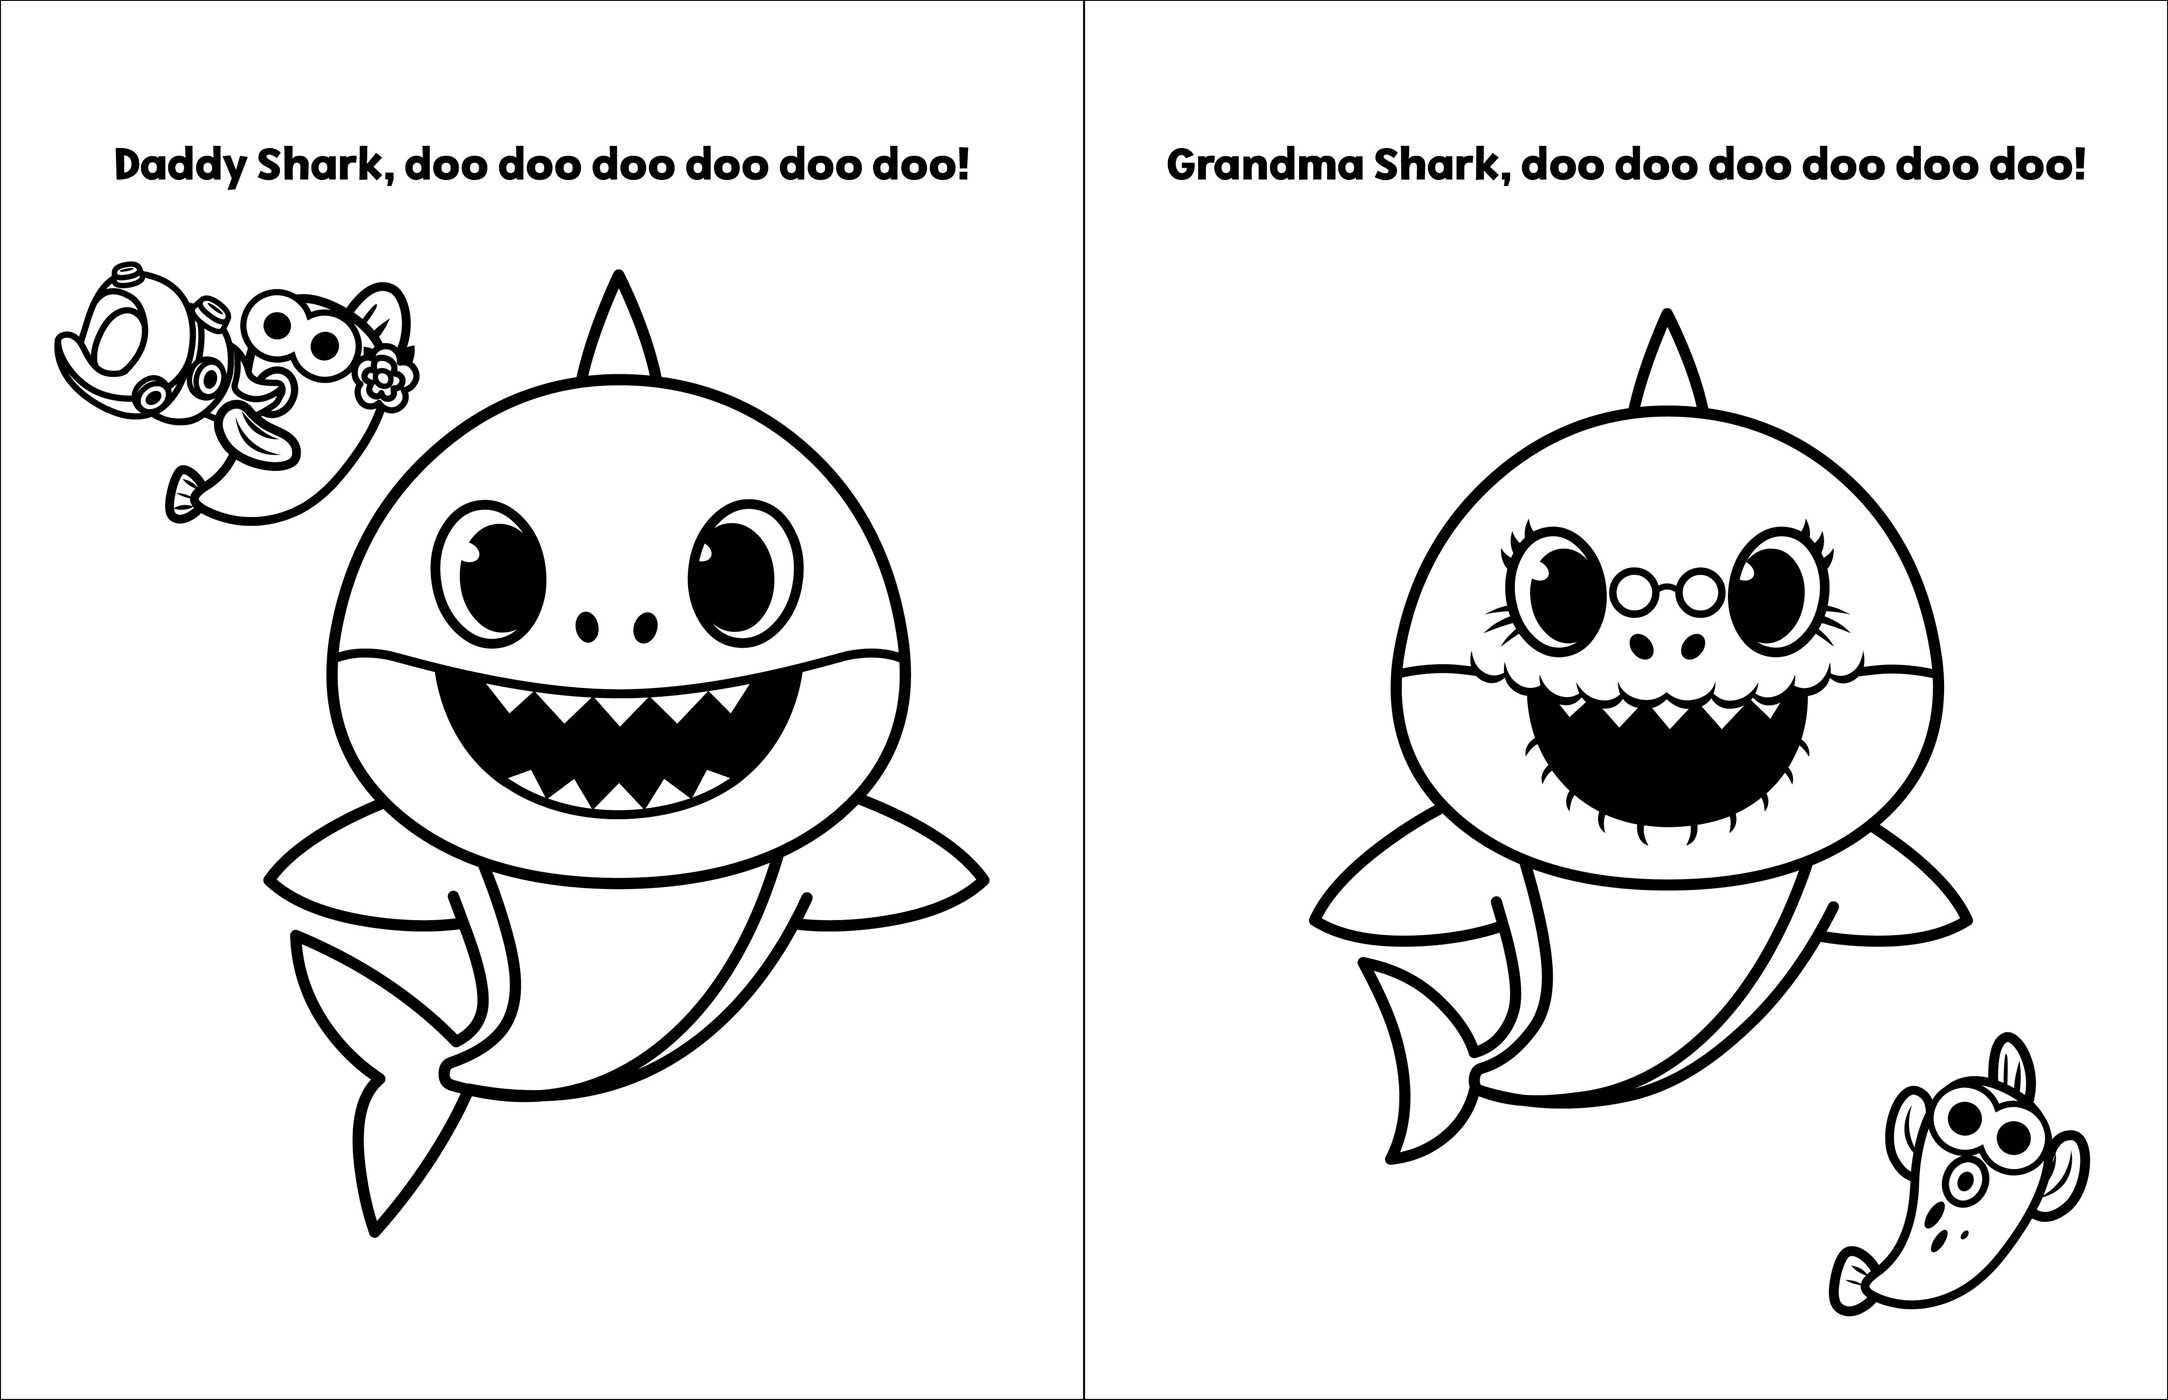 Coloring Pages Baby Shark
 Pinkfong Baby Shark My First Big Book of Coloring